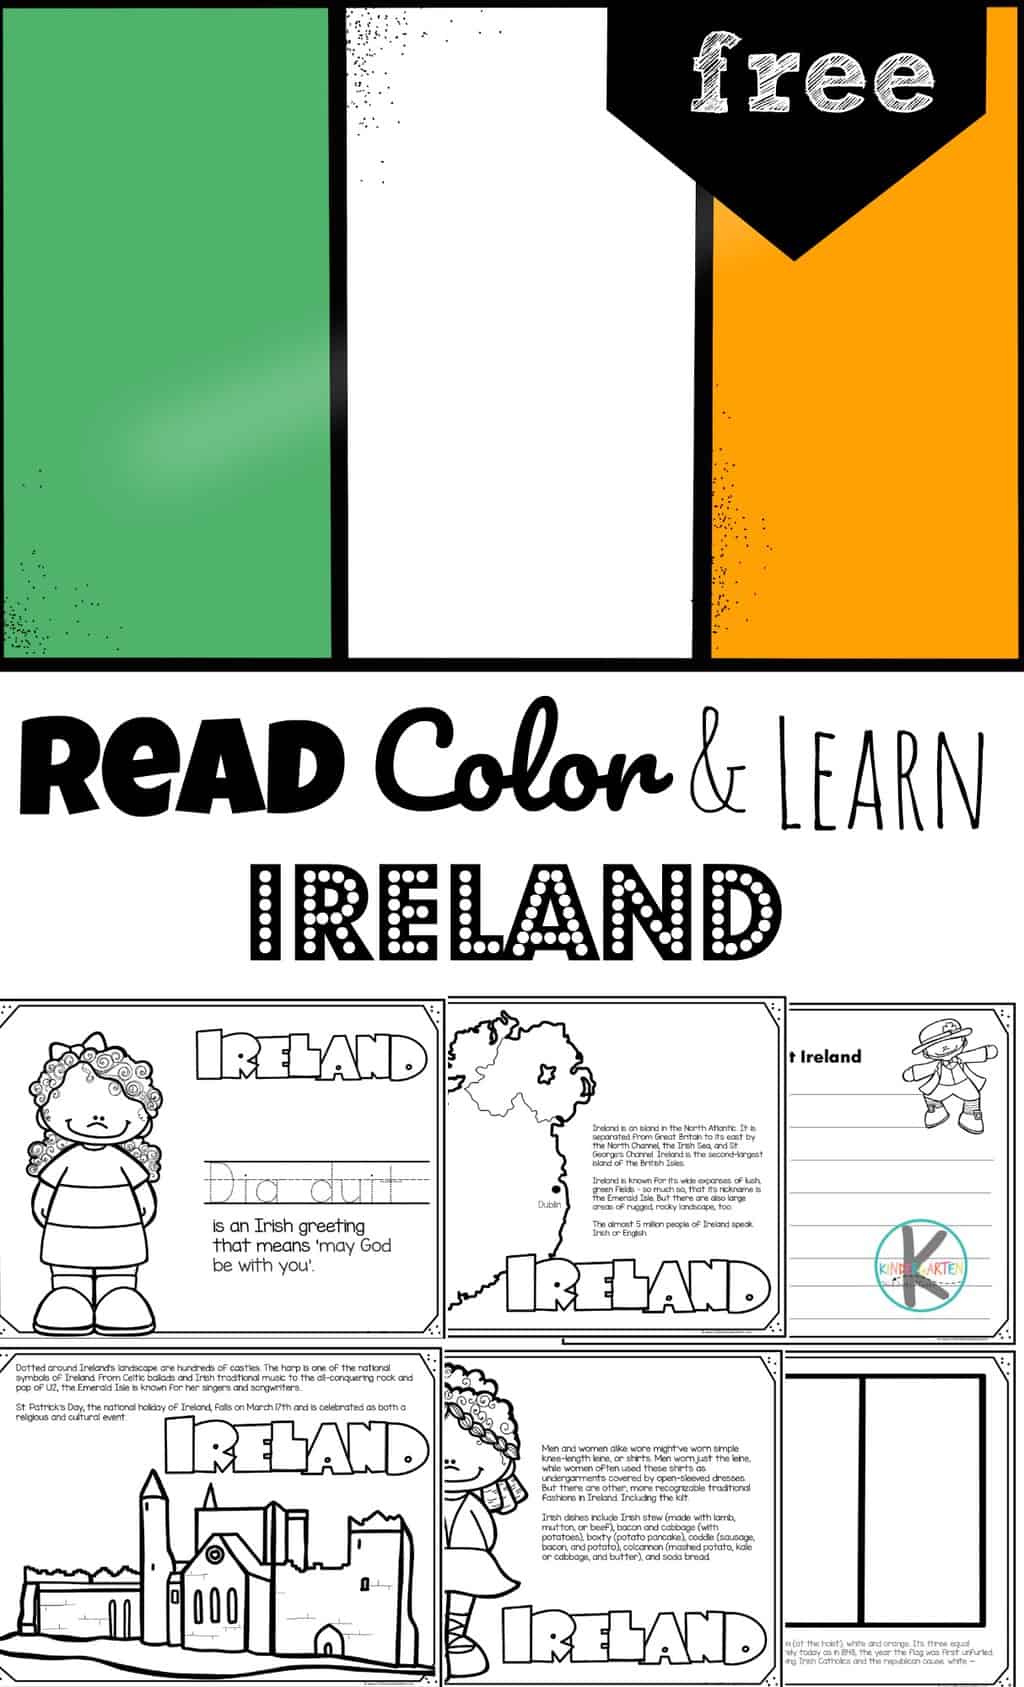 Free ireland coloring page for kids to read color and learn